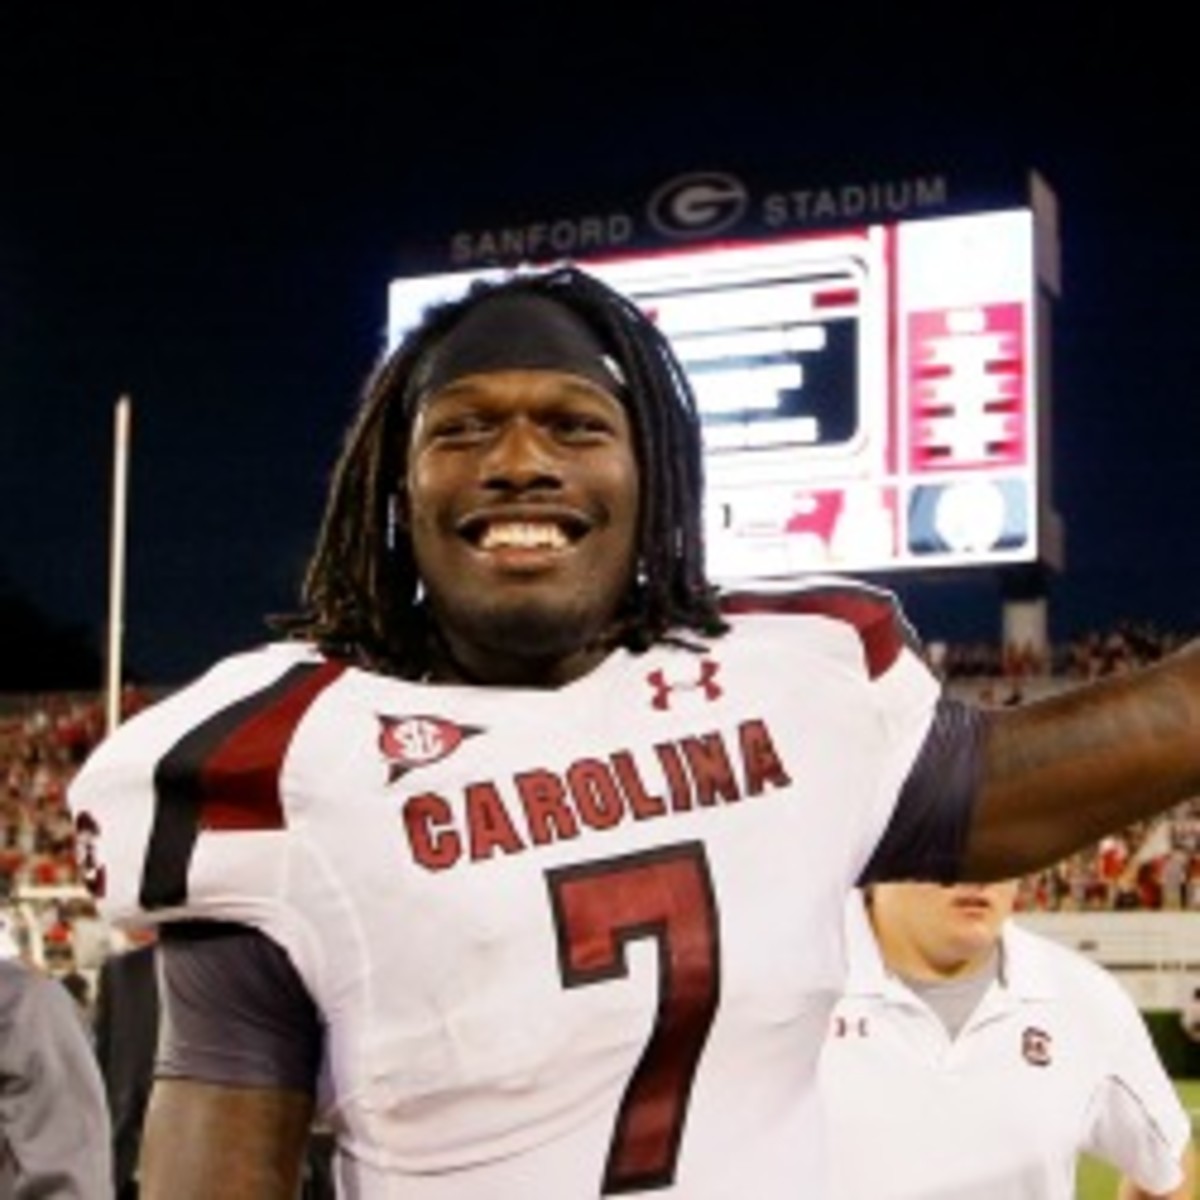 South Carolina defensive end Jadeveon Clowney cannot play in the NFL until he is three years removed from high school, according to NFL rules. (Kevin C. Cox/Getty Images)